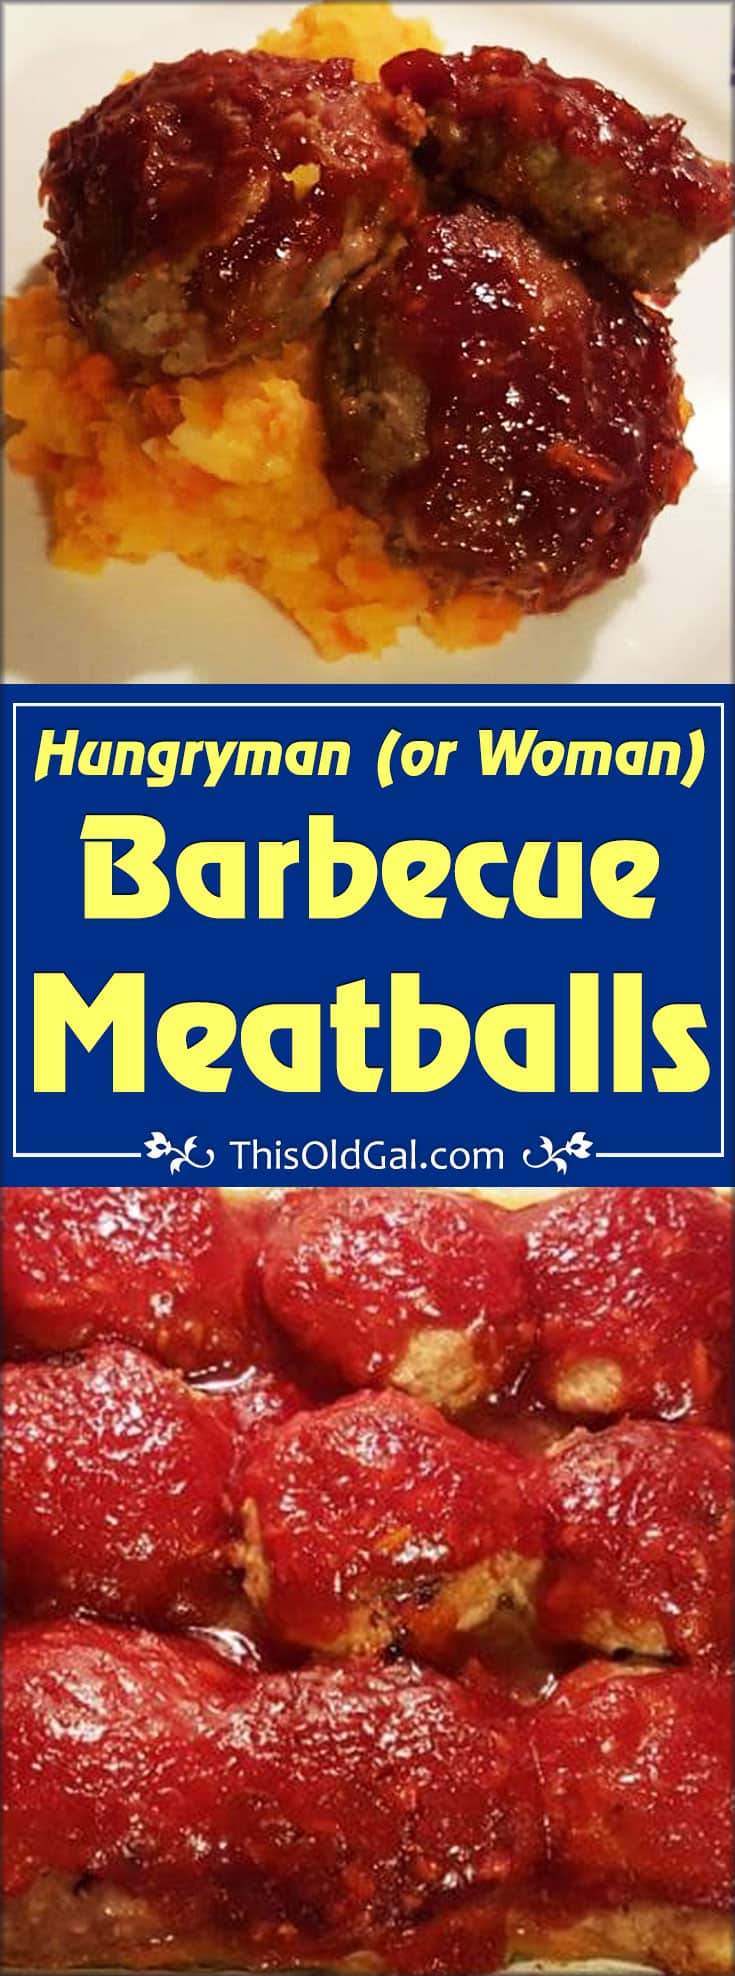 Hungryman (or Woman) Barbecue Meatballs